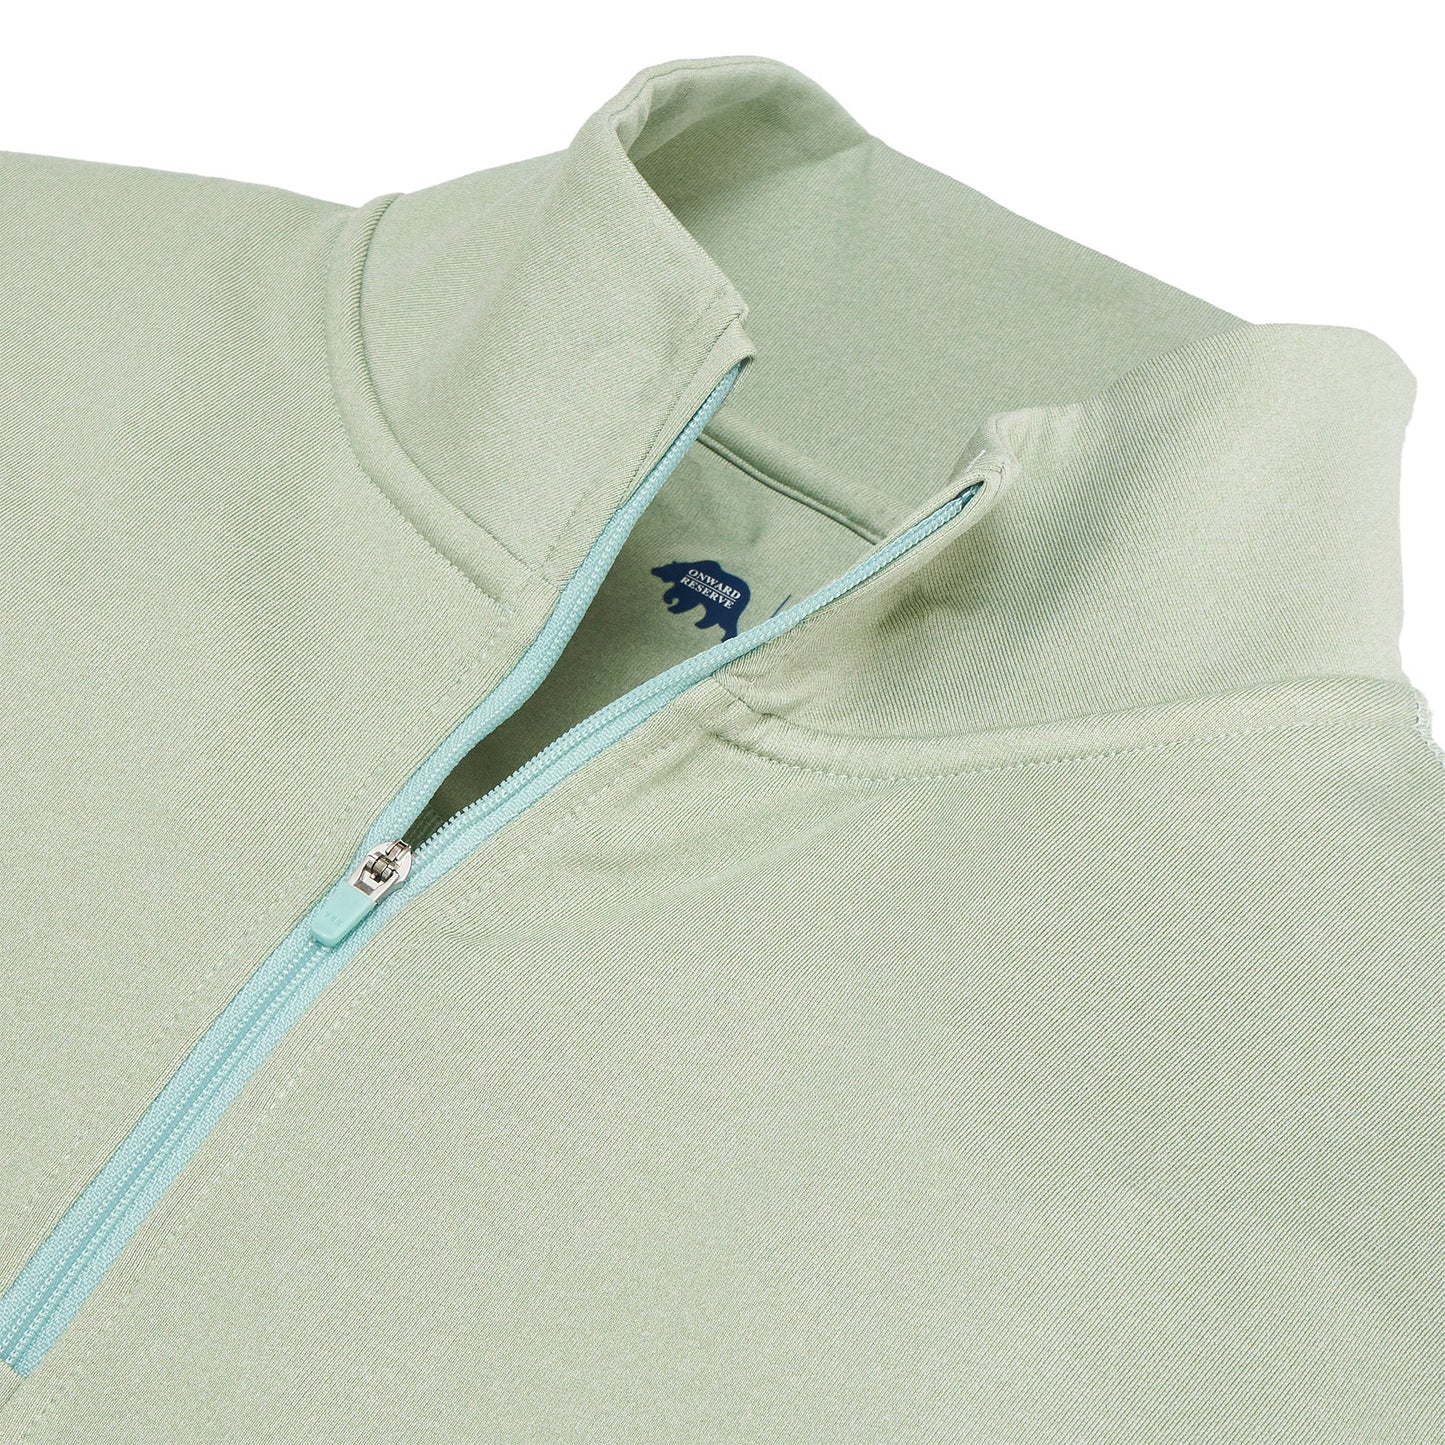 Flow Performance 1/4 Zip Pullover - Frosty Green